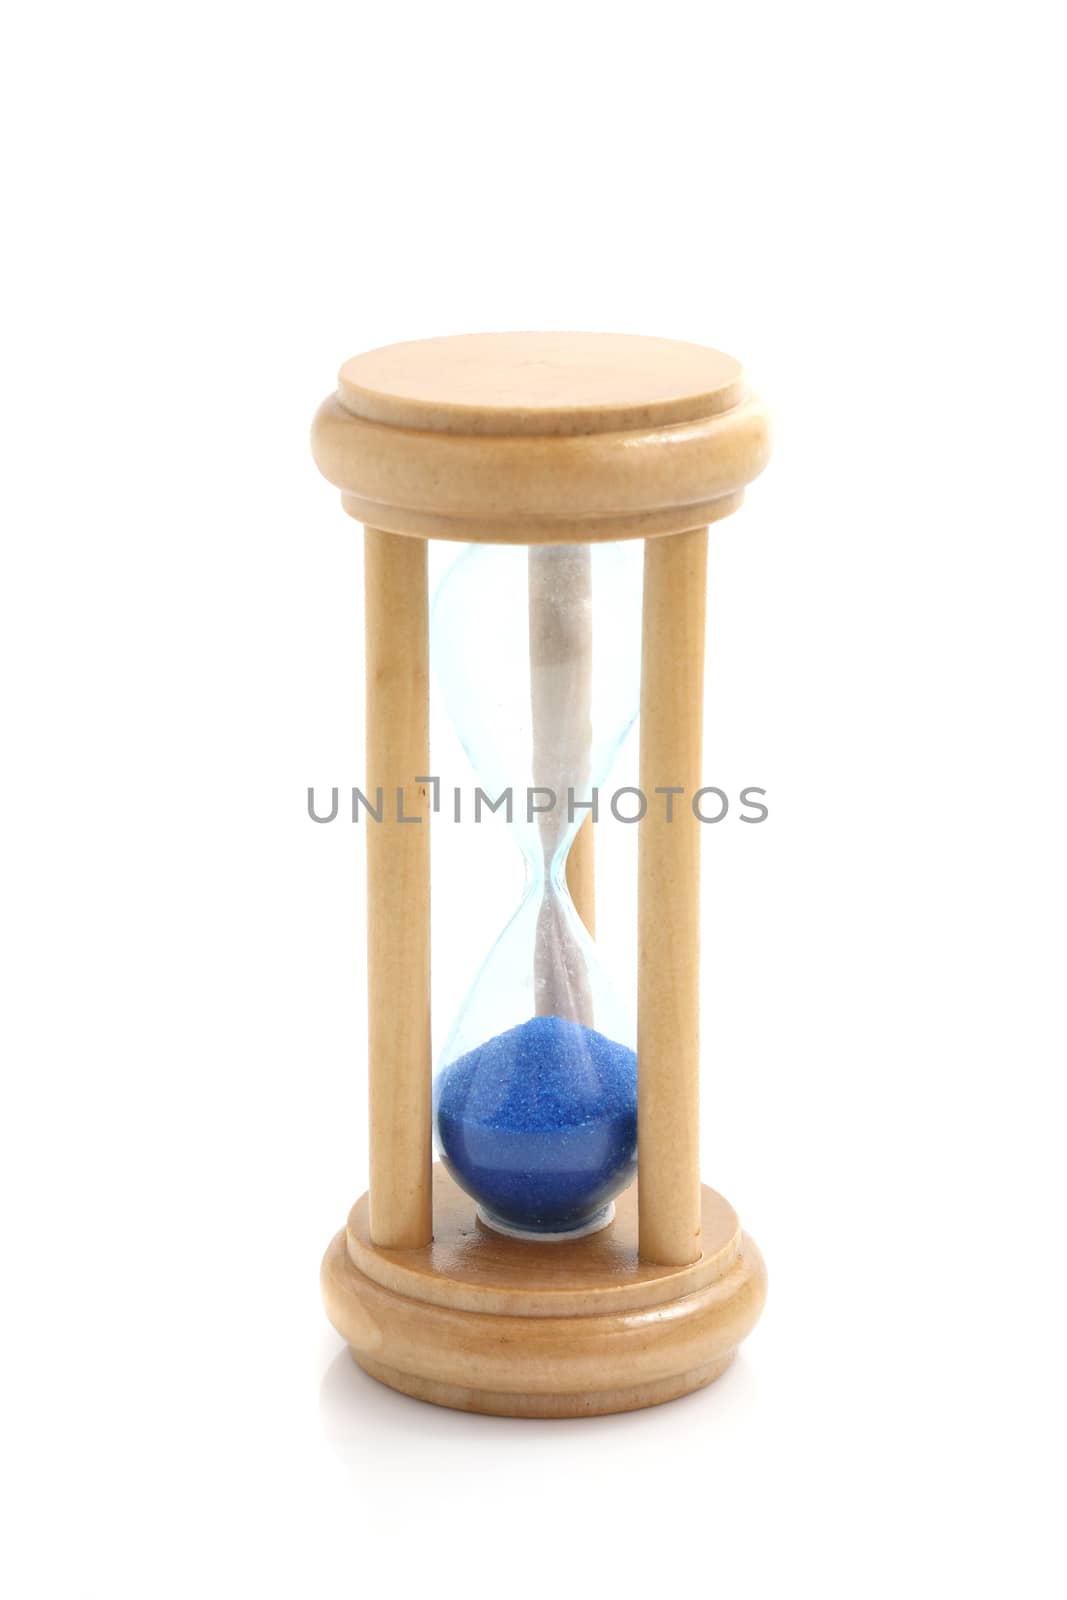 sandglass isolated in white background by piyato